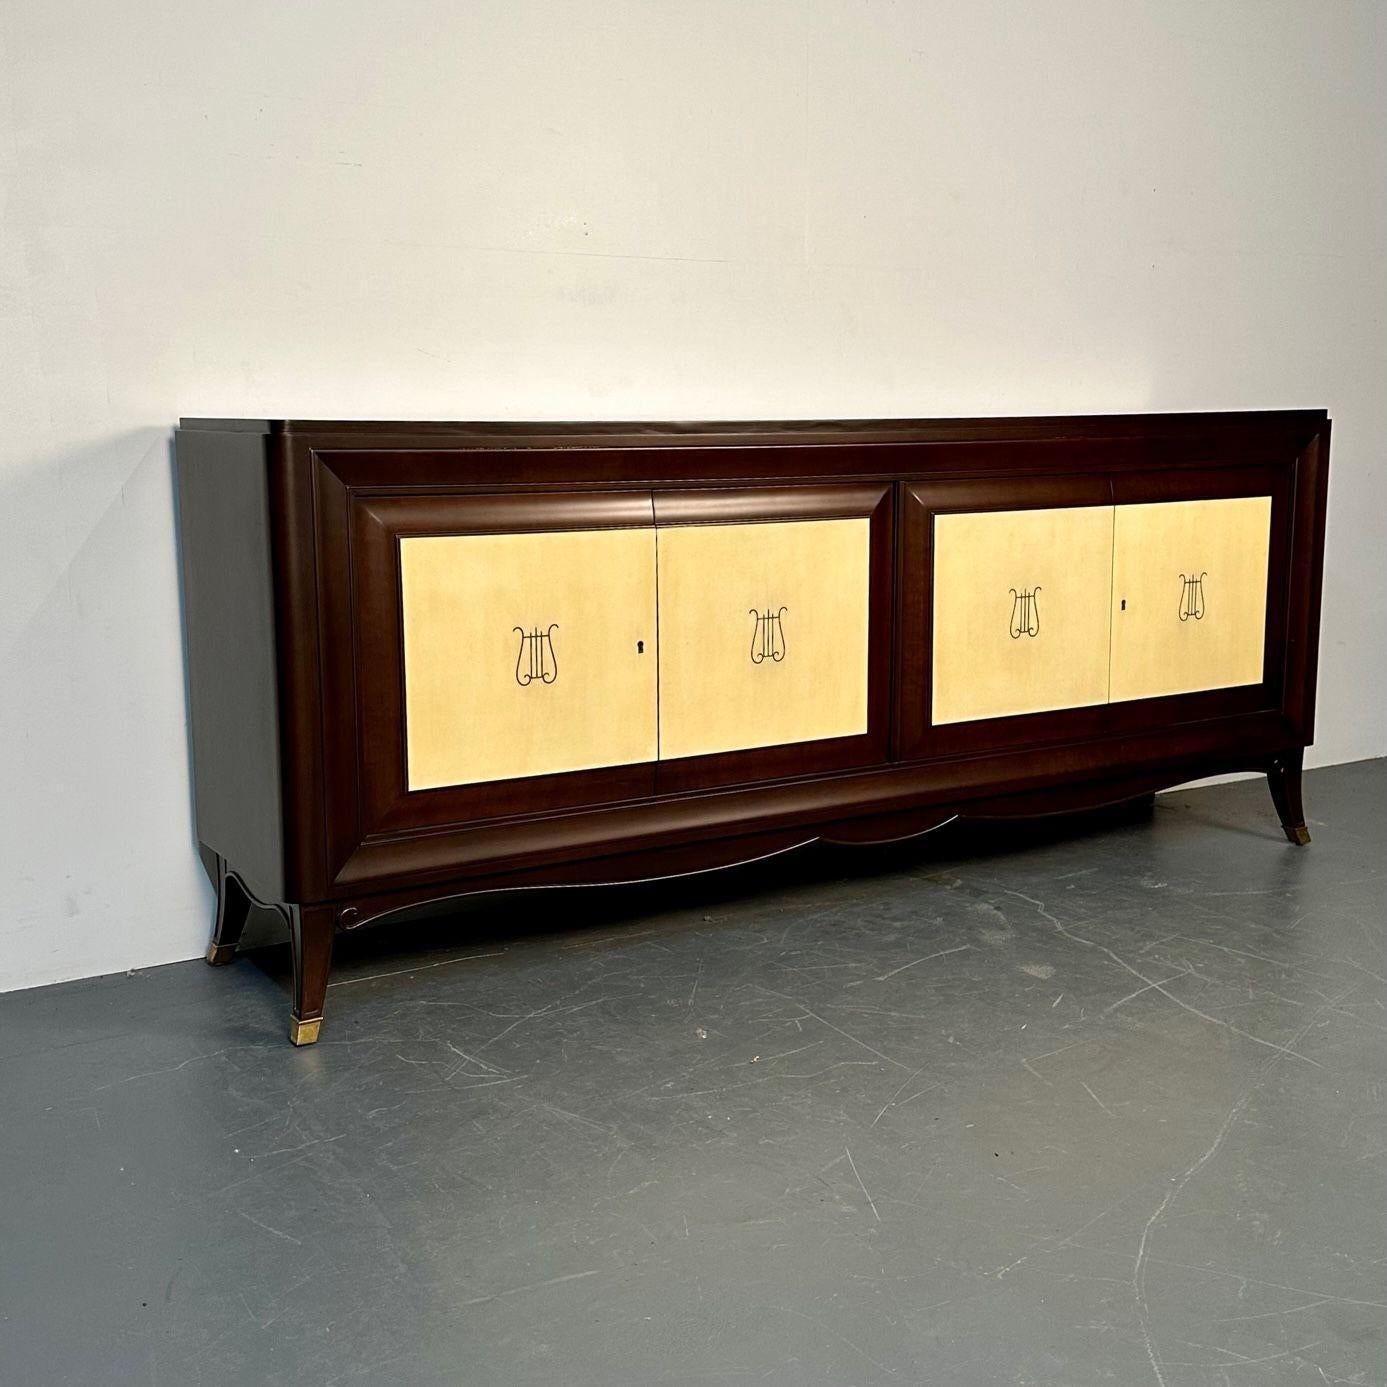 Italian Midcentury Sideboard / Credenza / Cabinet, Parchment, Mahogany, 1950s For Sale 1